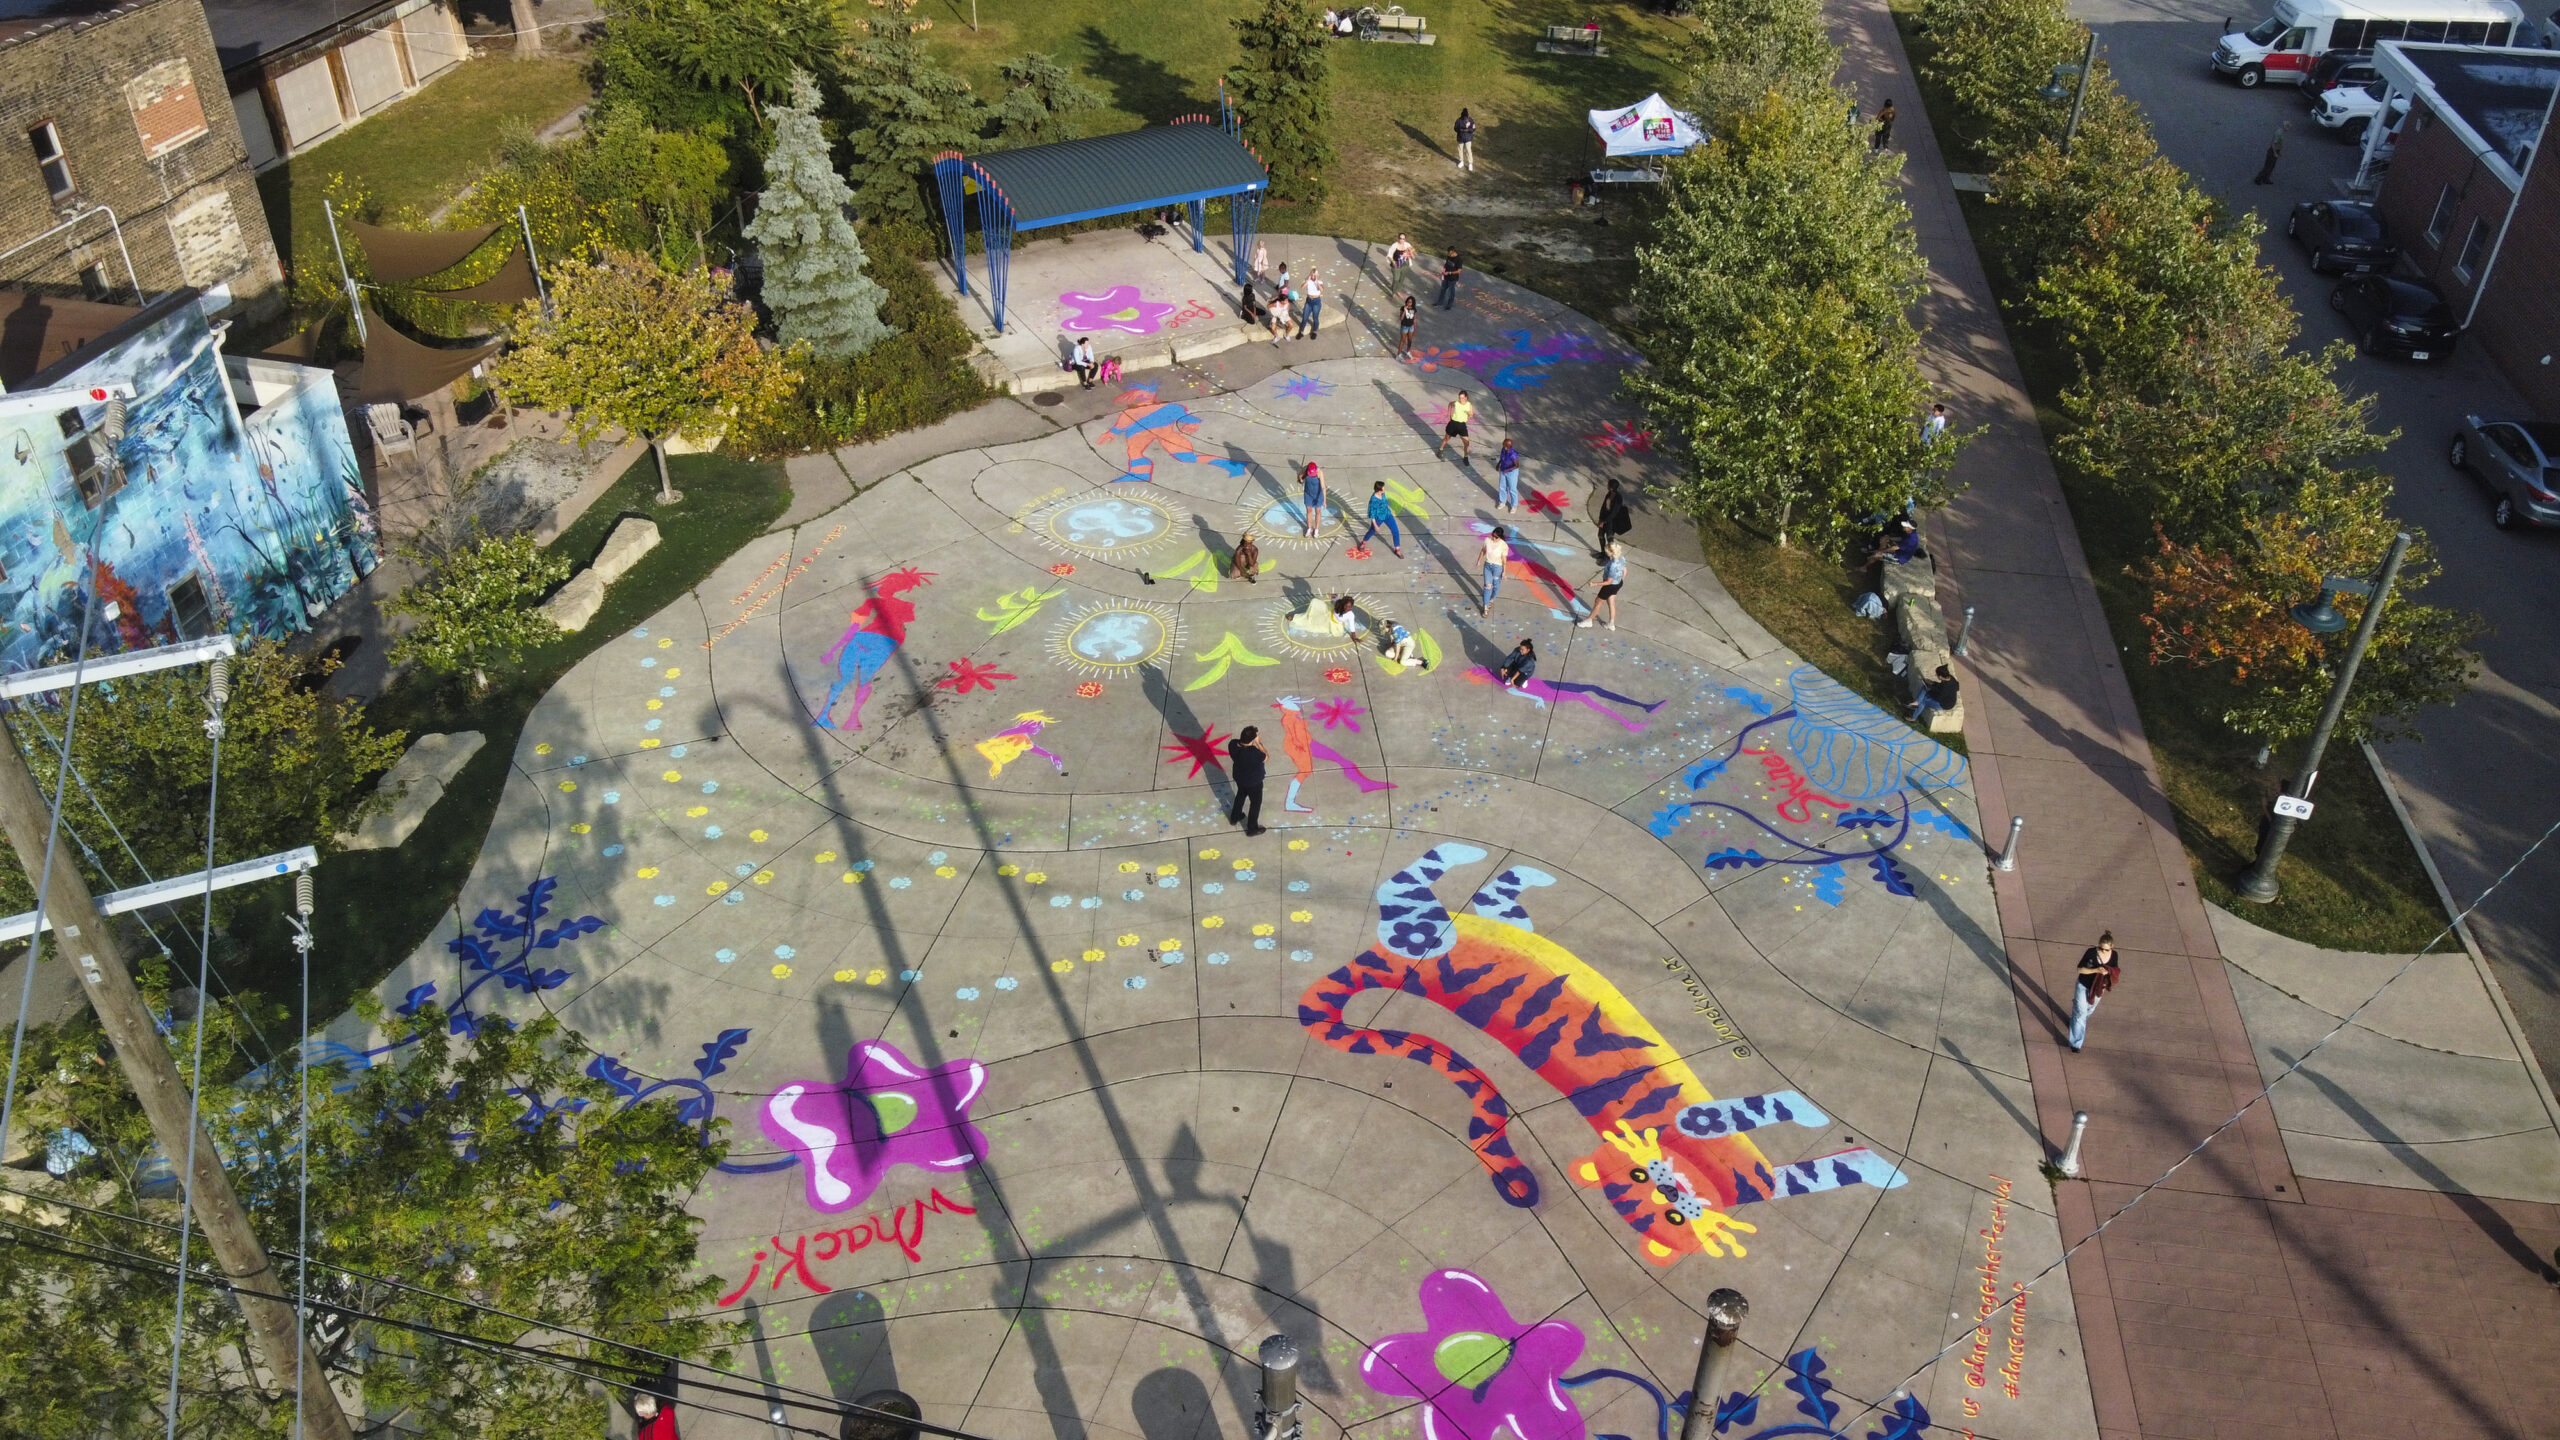 An overhead shot of a large cement area that has been painted with designs of flowers and animals in a variety of colours.